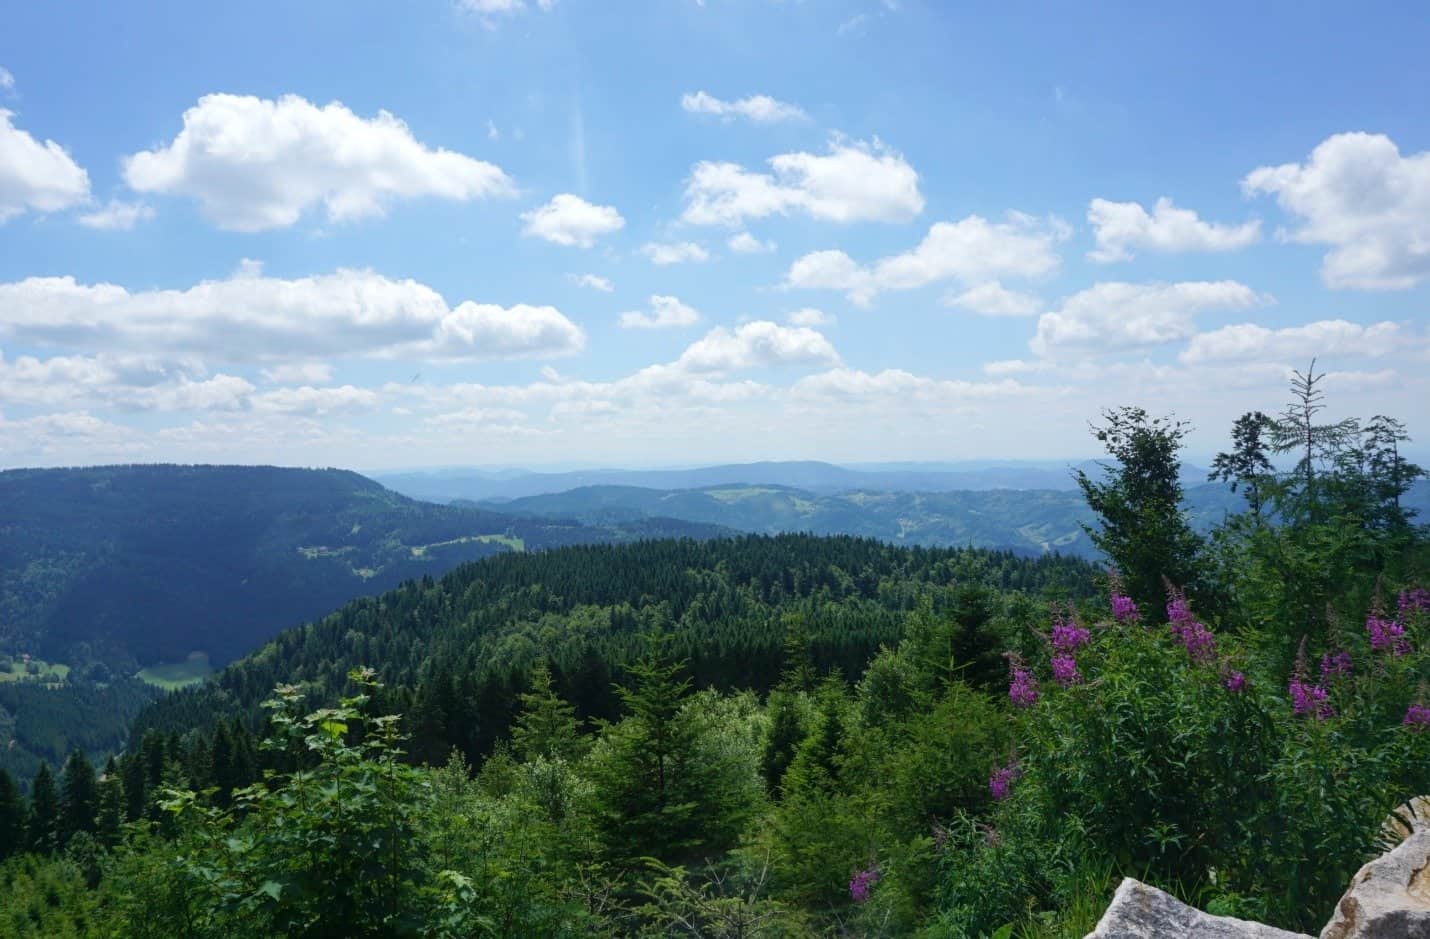 Being at the Black Forest is like being at the tops of the world www.extraordinarychaos.com